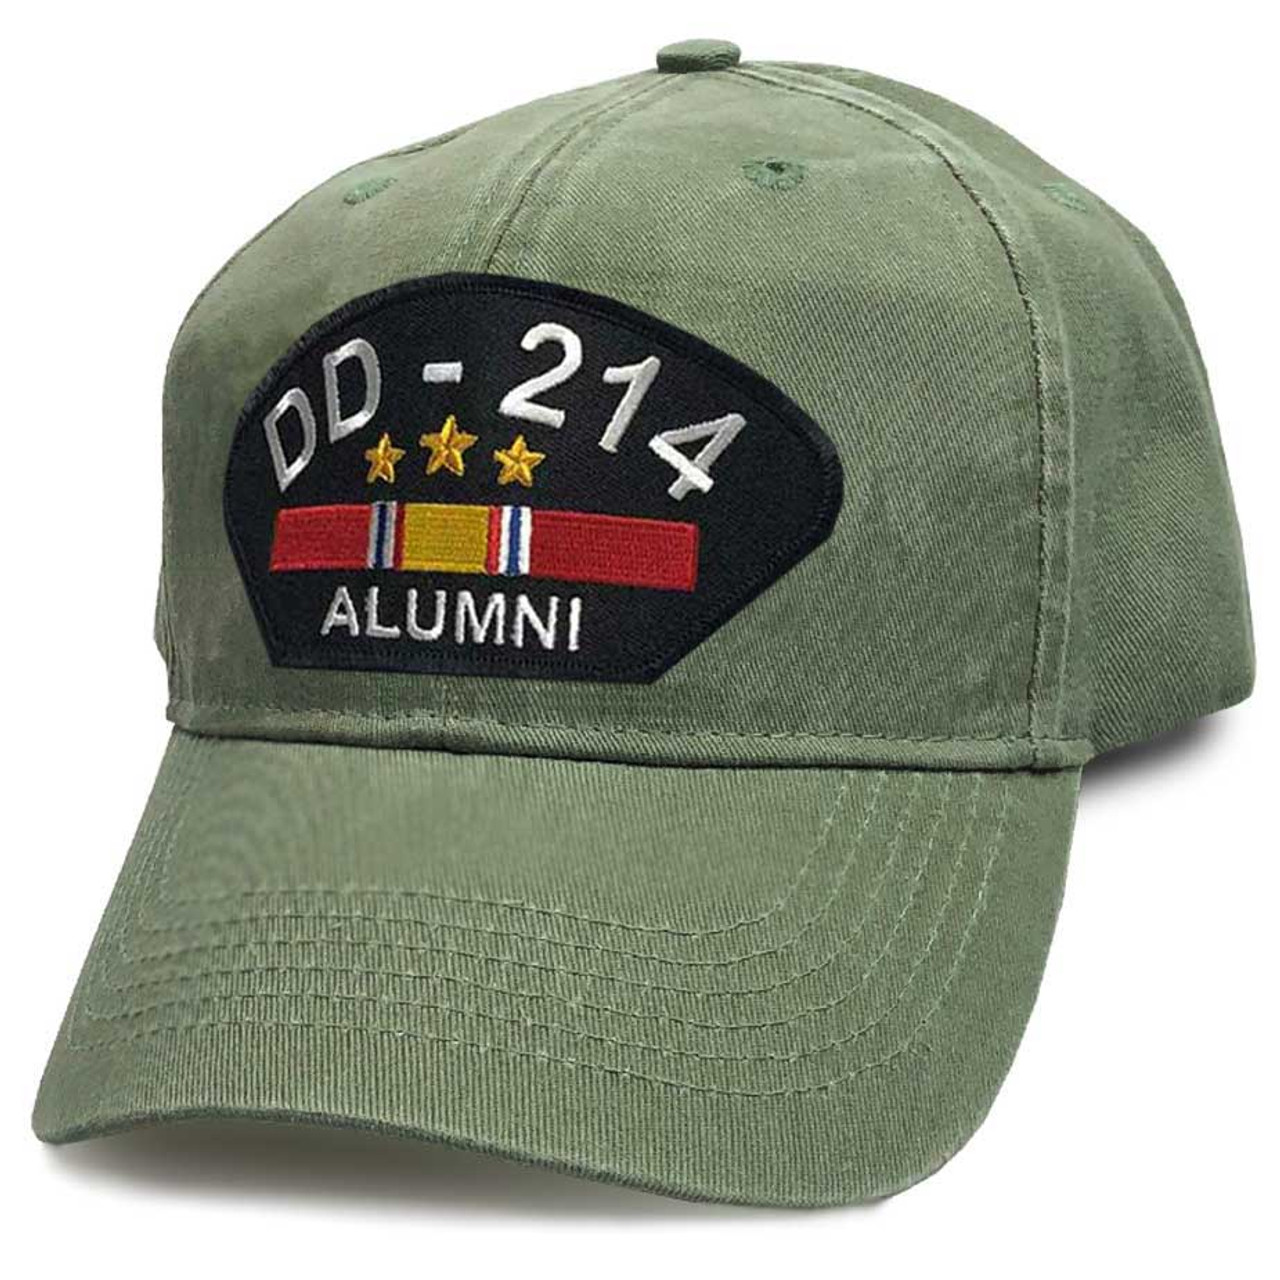 US Veteran Hat with DD-214 Alumni Text and National Service Ribbon Graphic